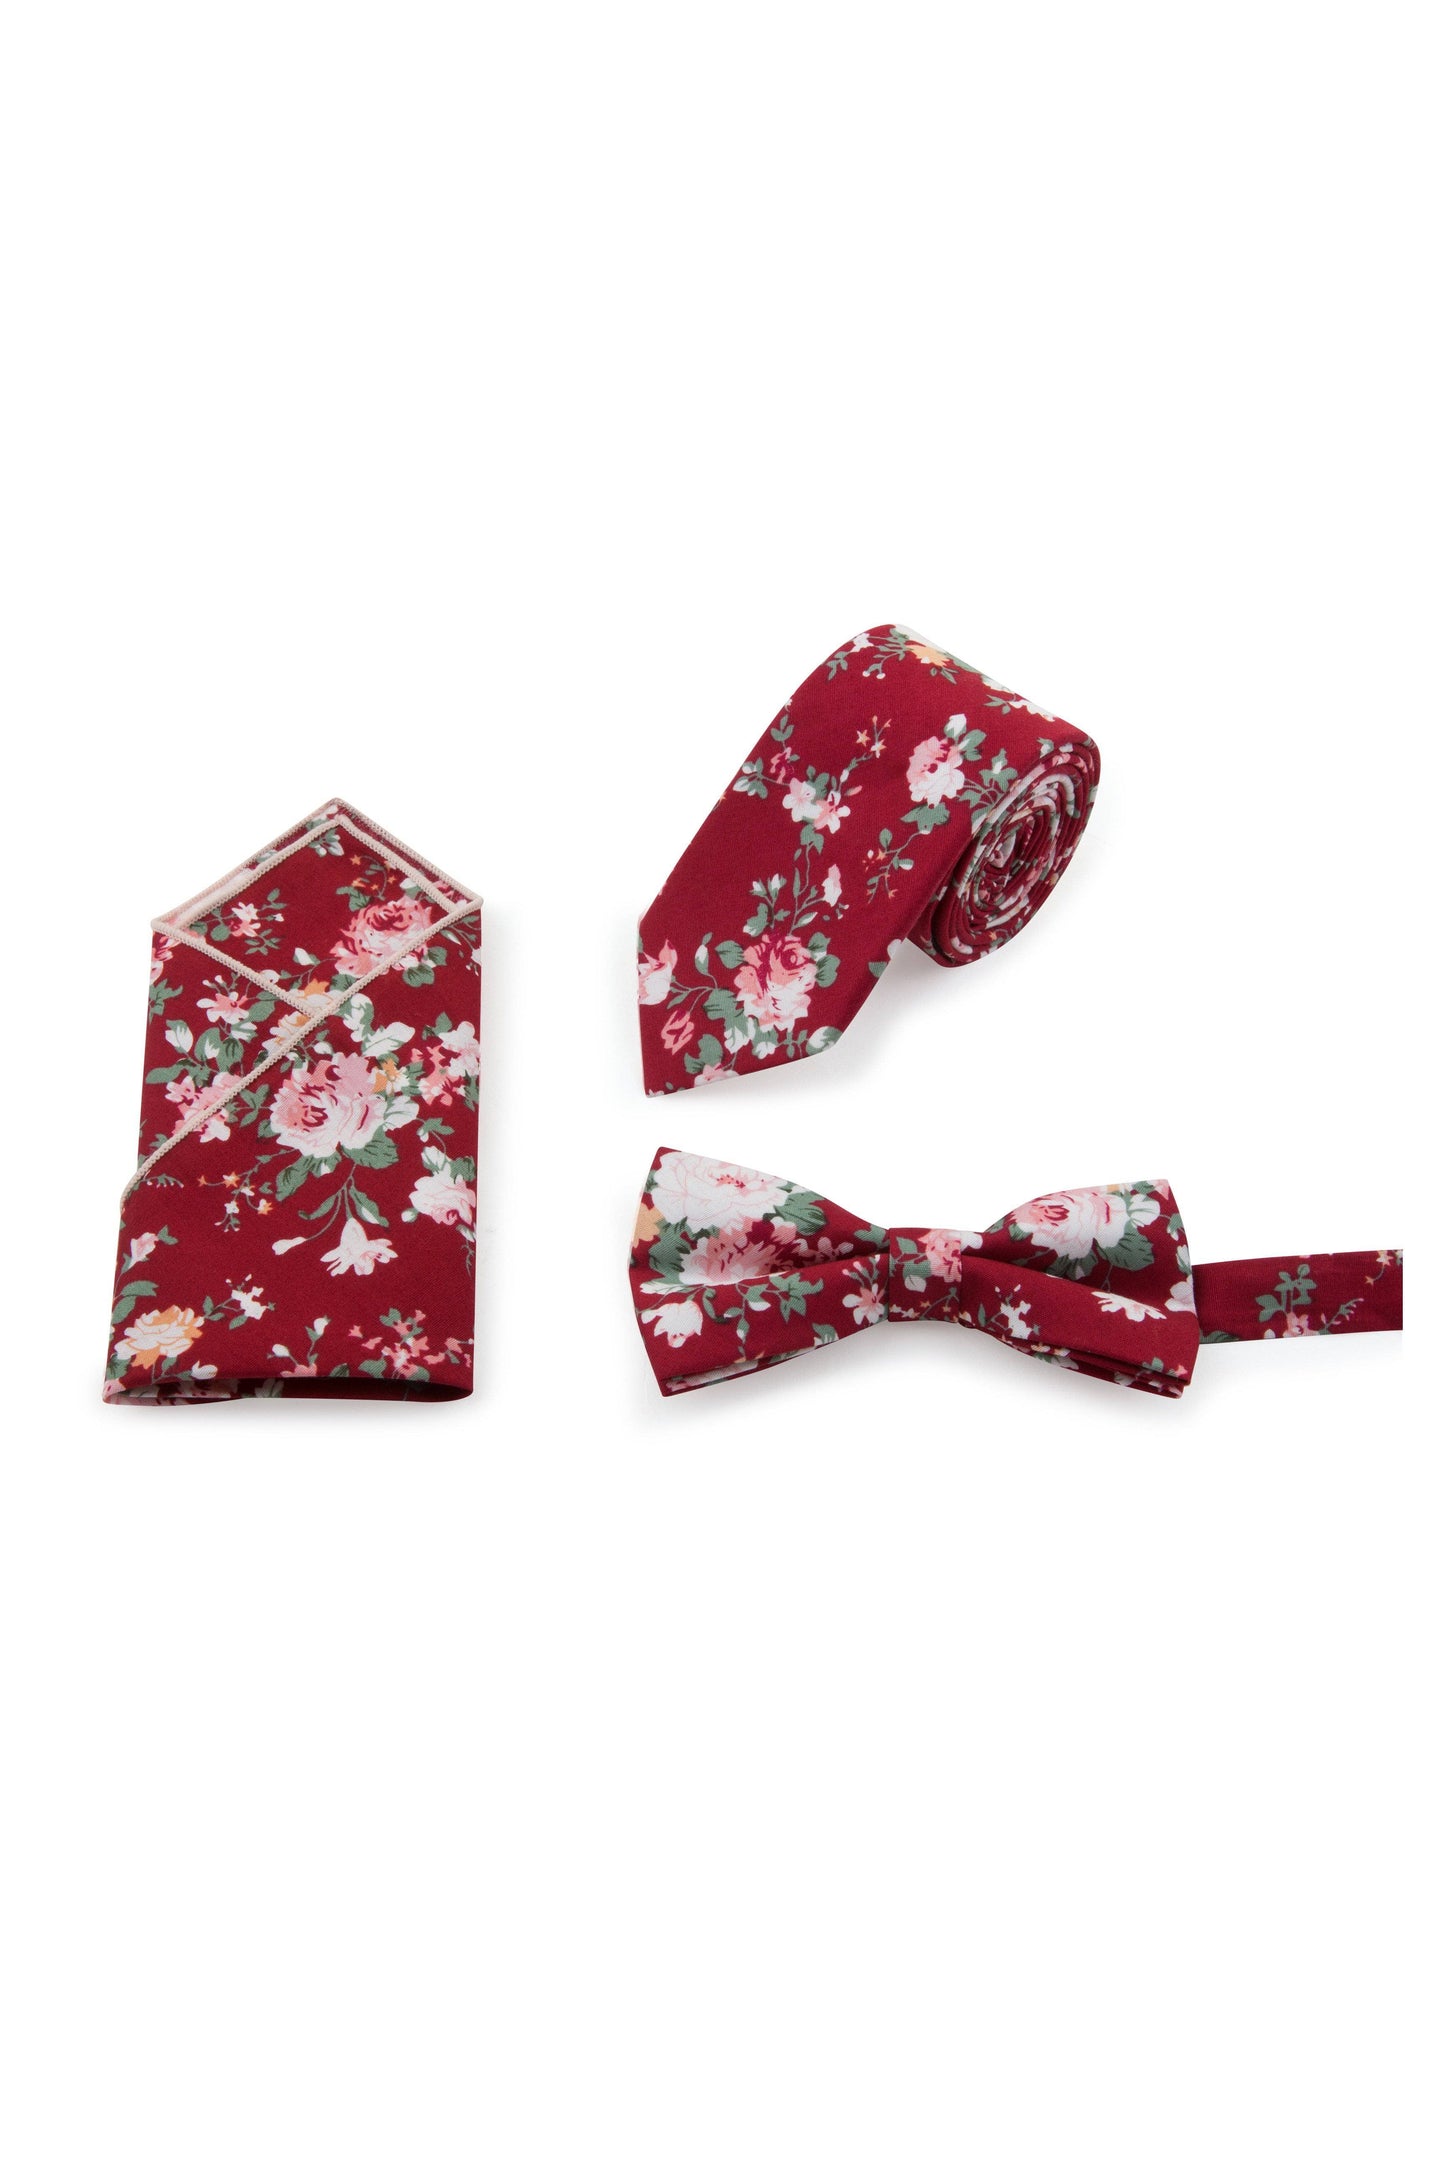 Red Floral Tie, Bow Tie & Pocket Square Set 